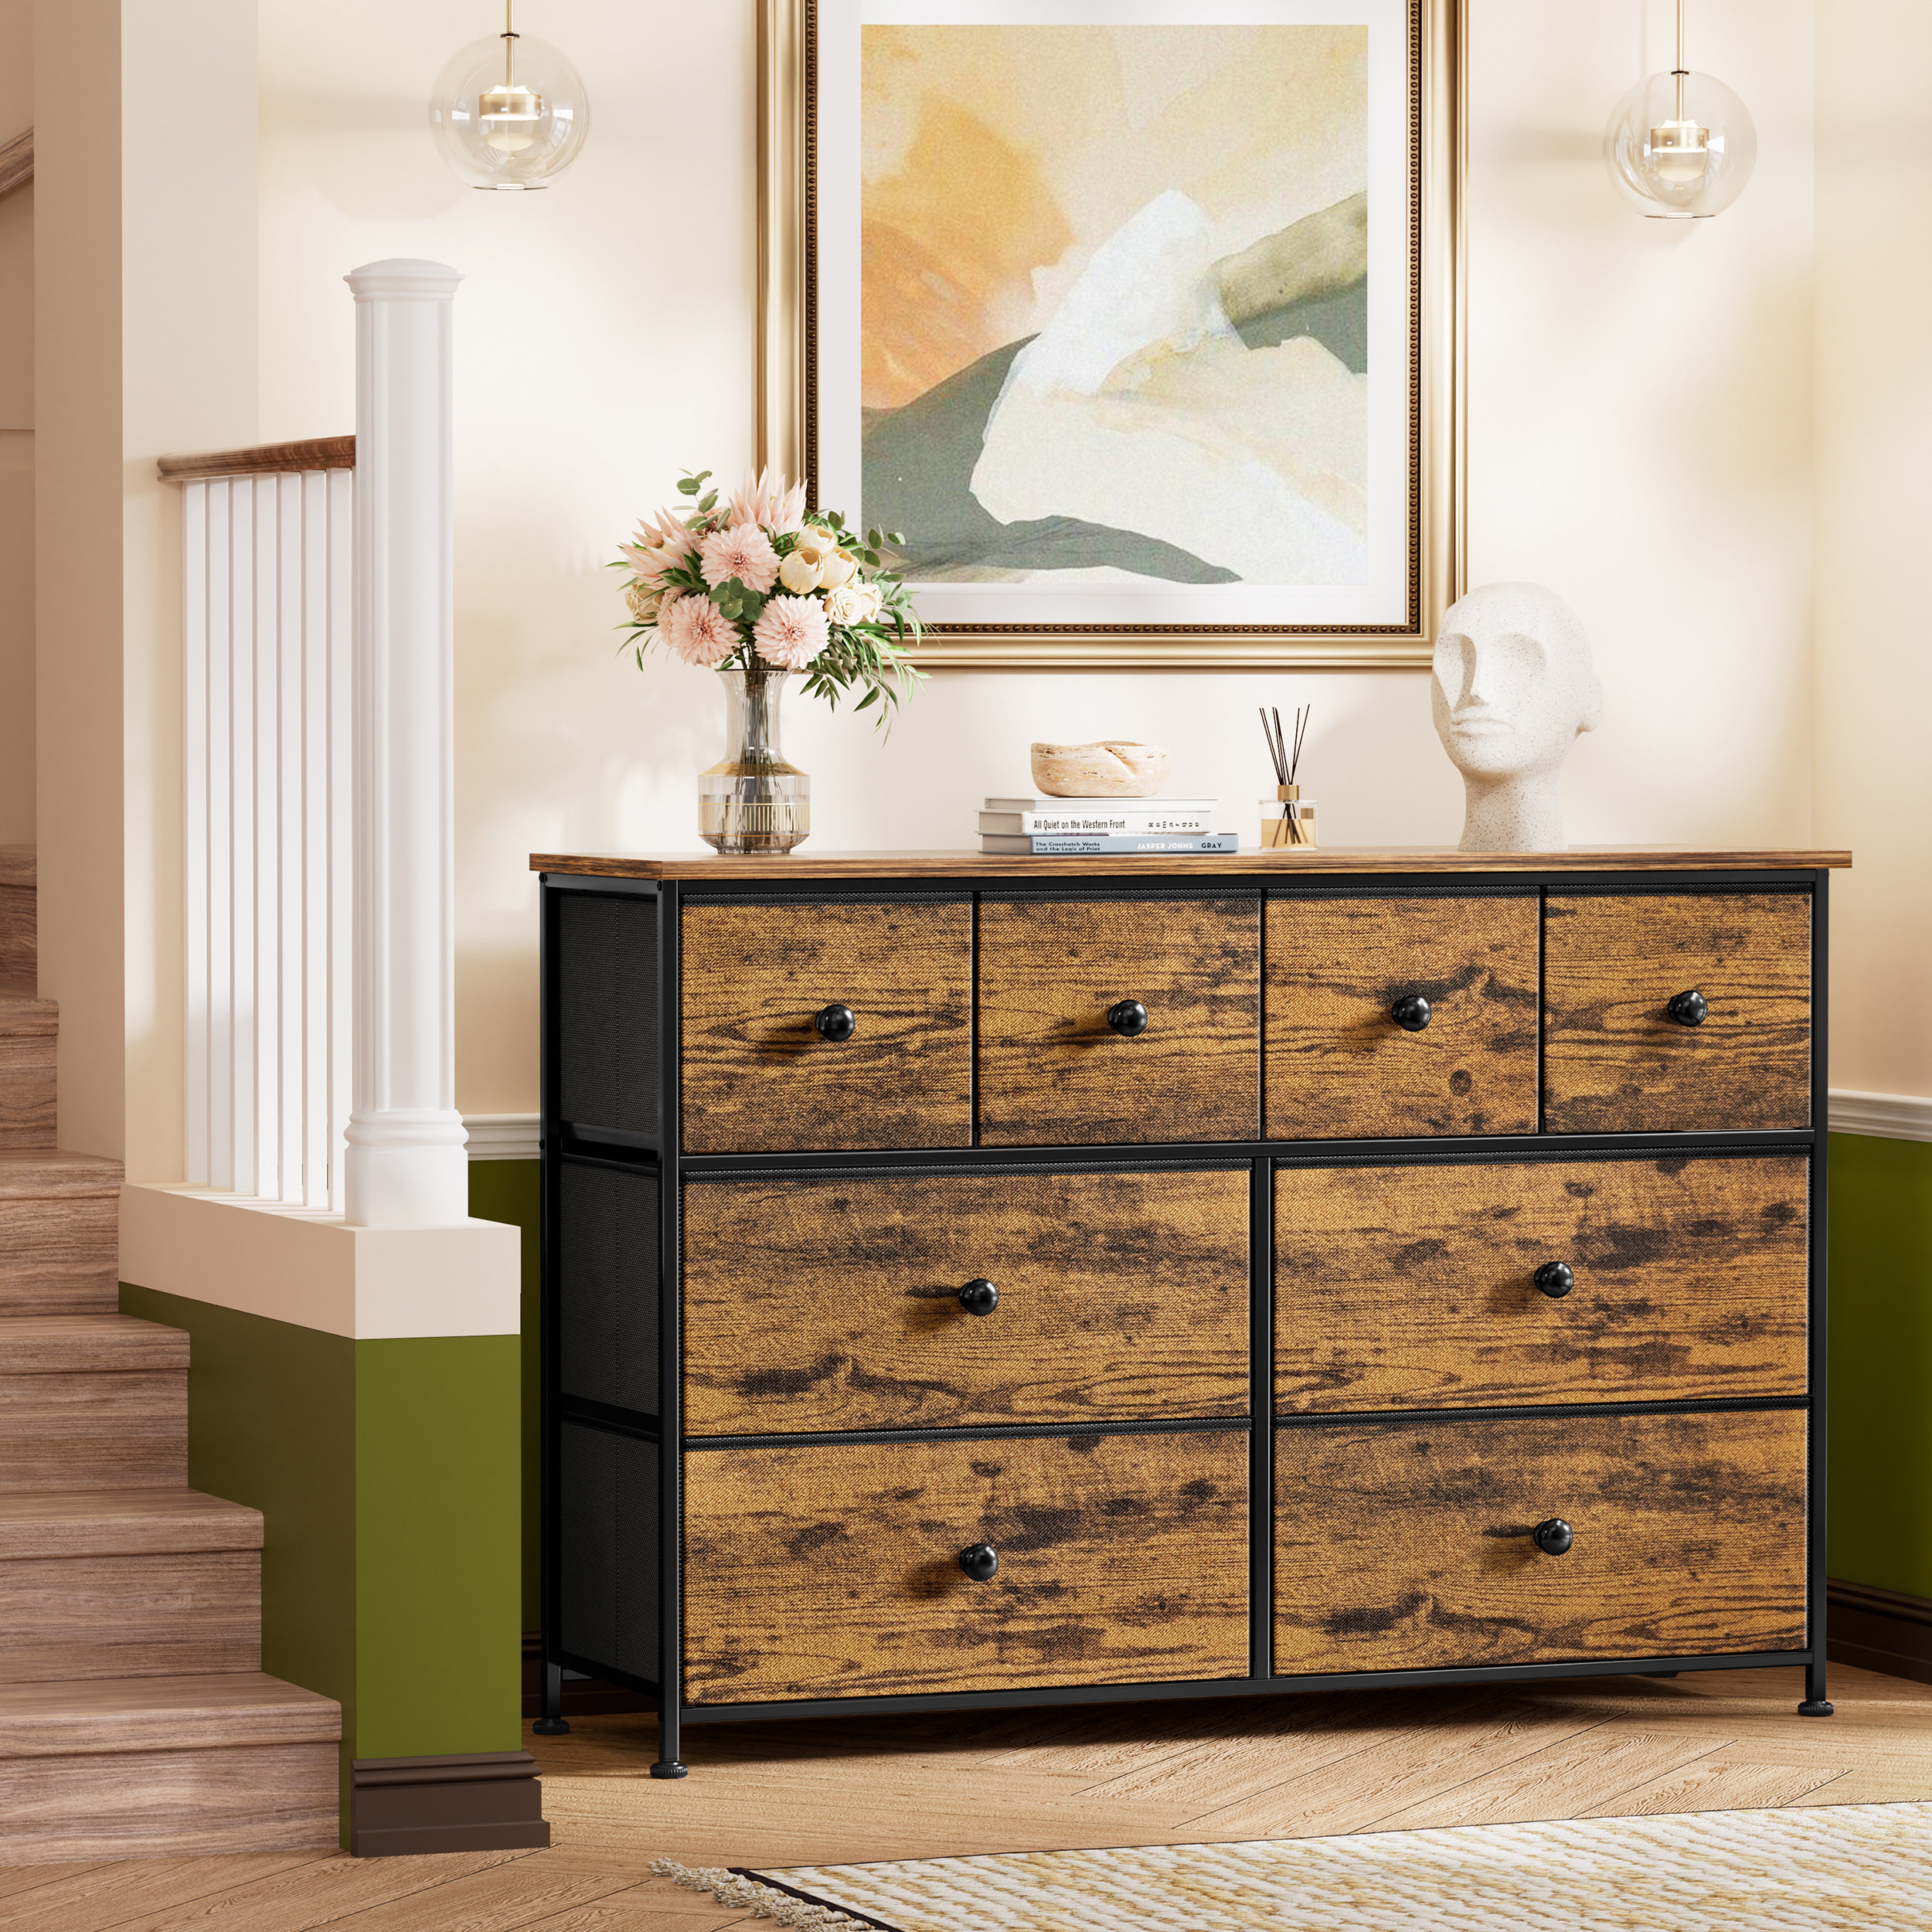 mDesign 4-Drawer Tall Fabric Dresser with Wood Handles